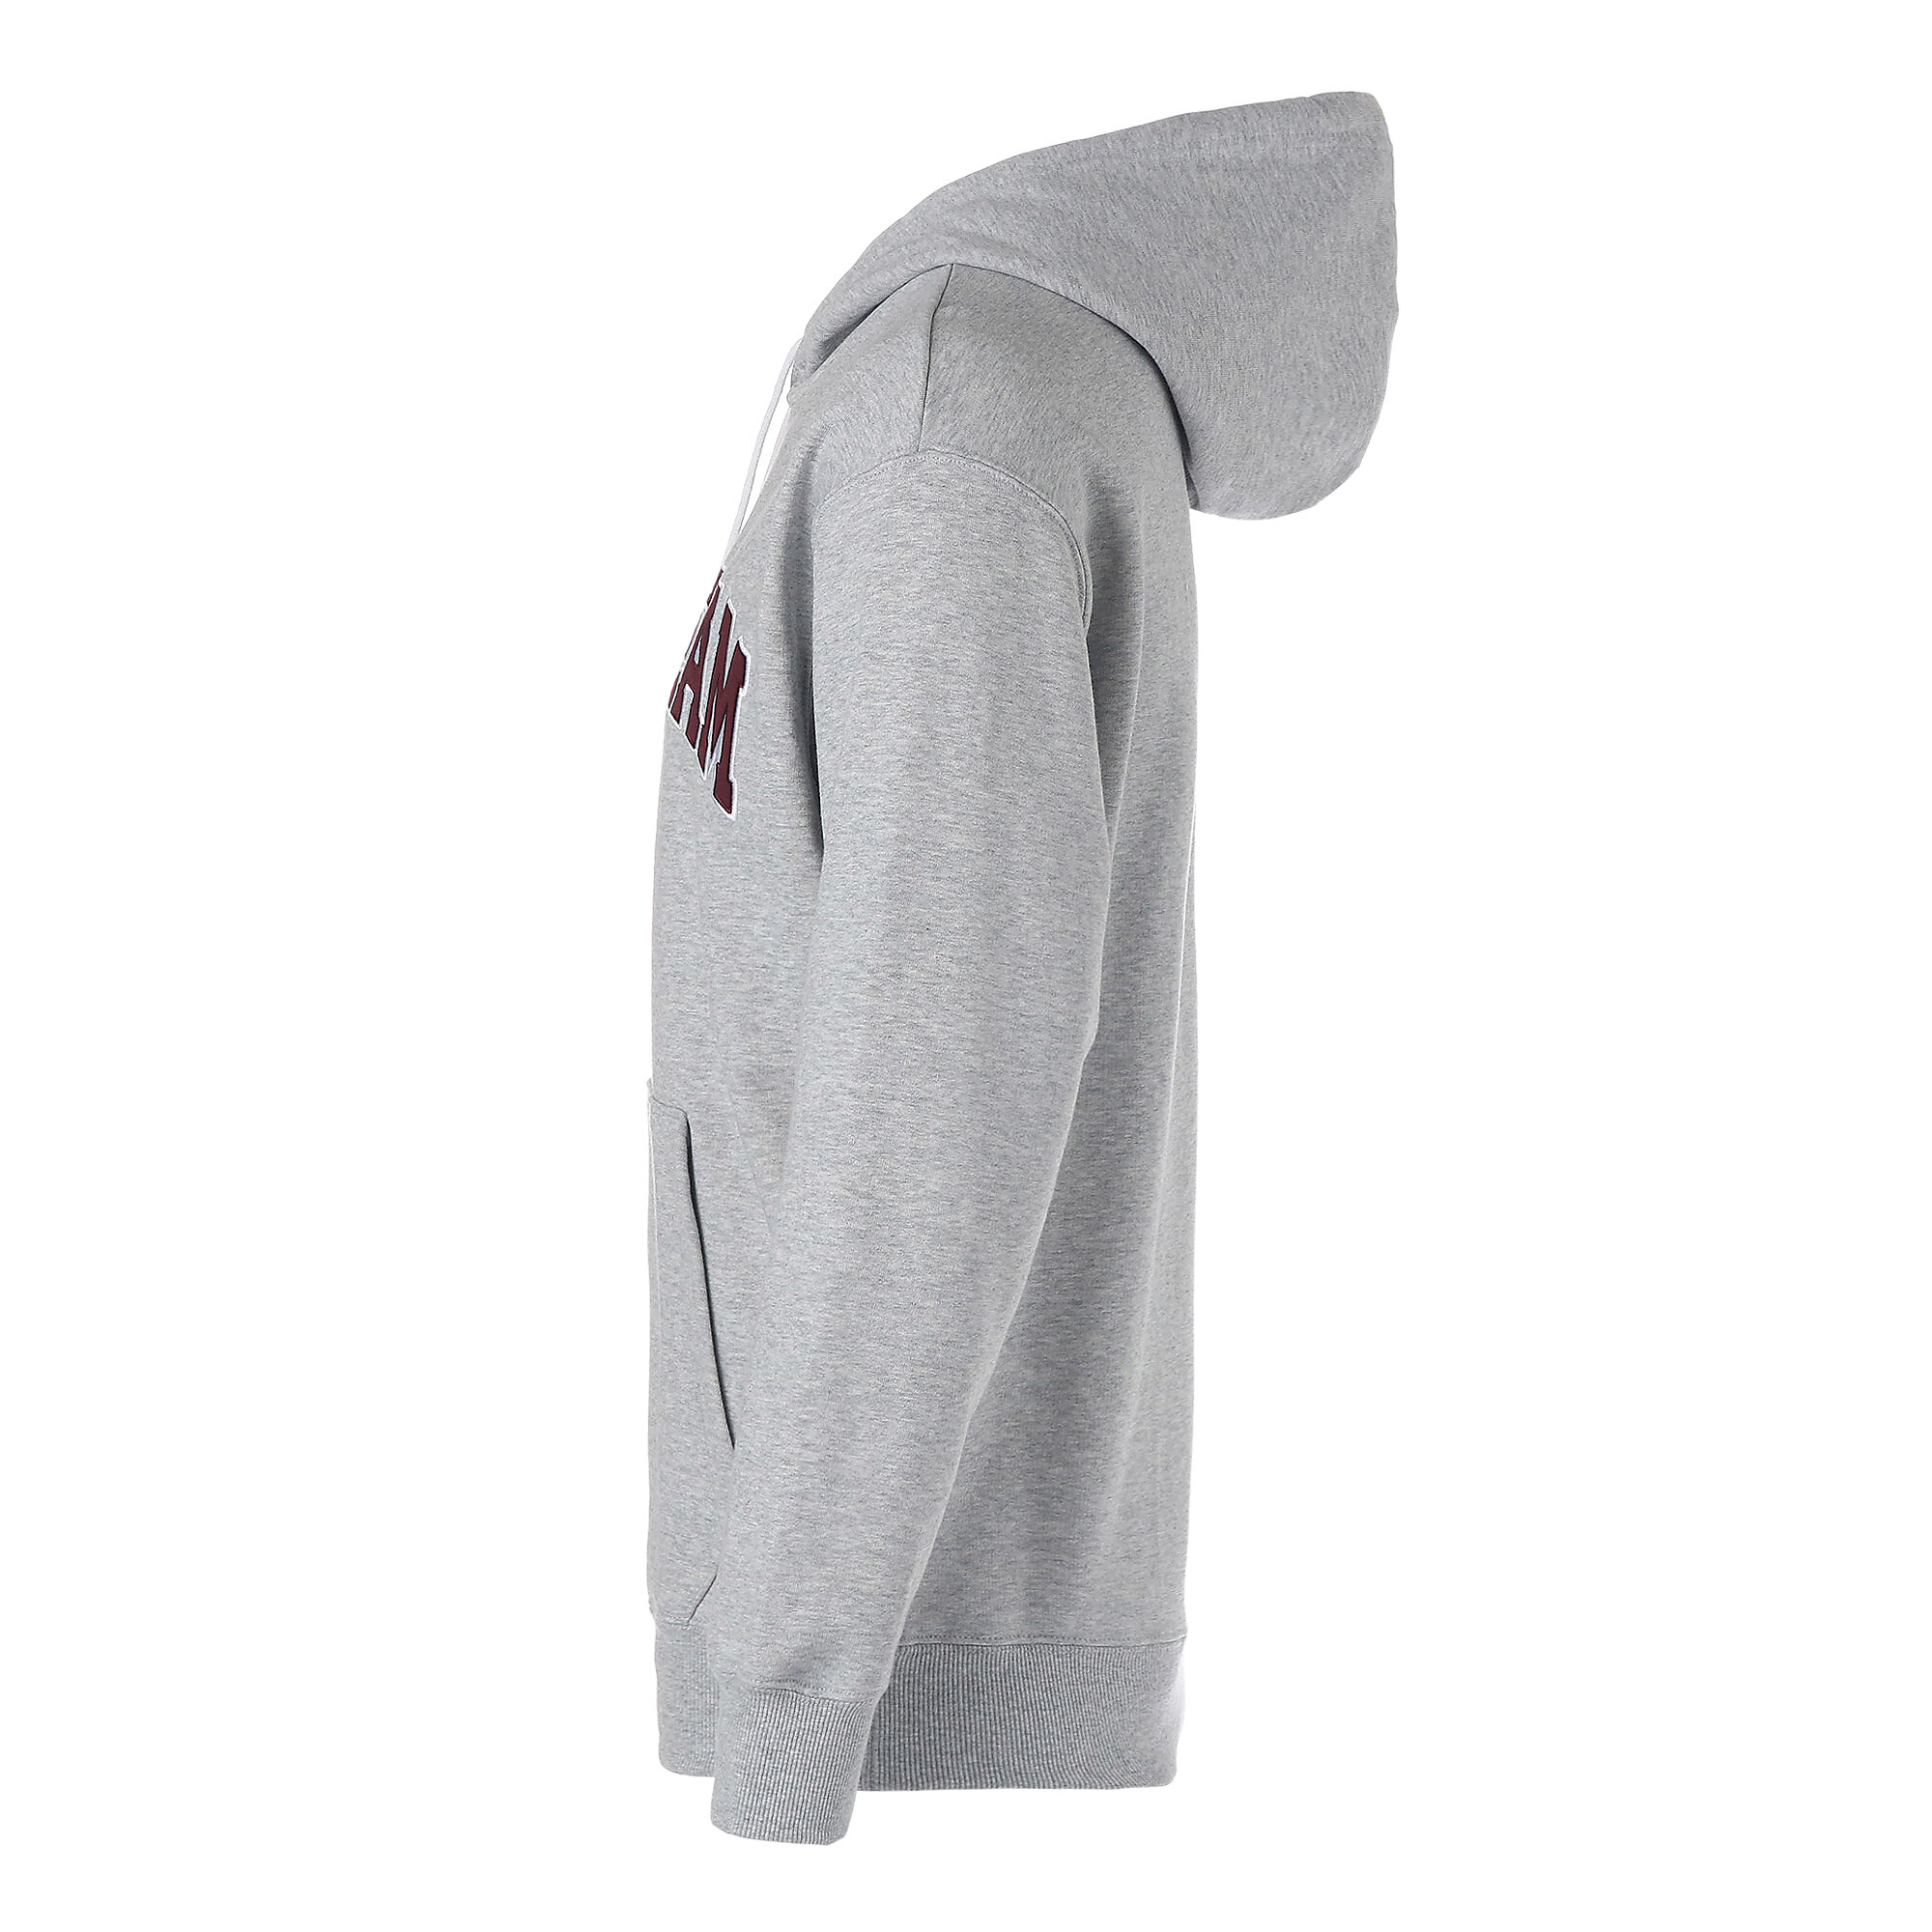 Men's PUMA Team Terry Hoodie Men In Heather, Size Small